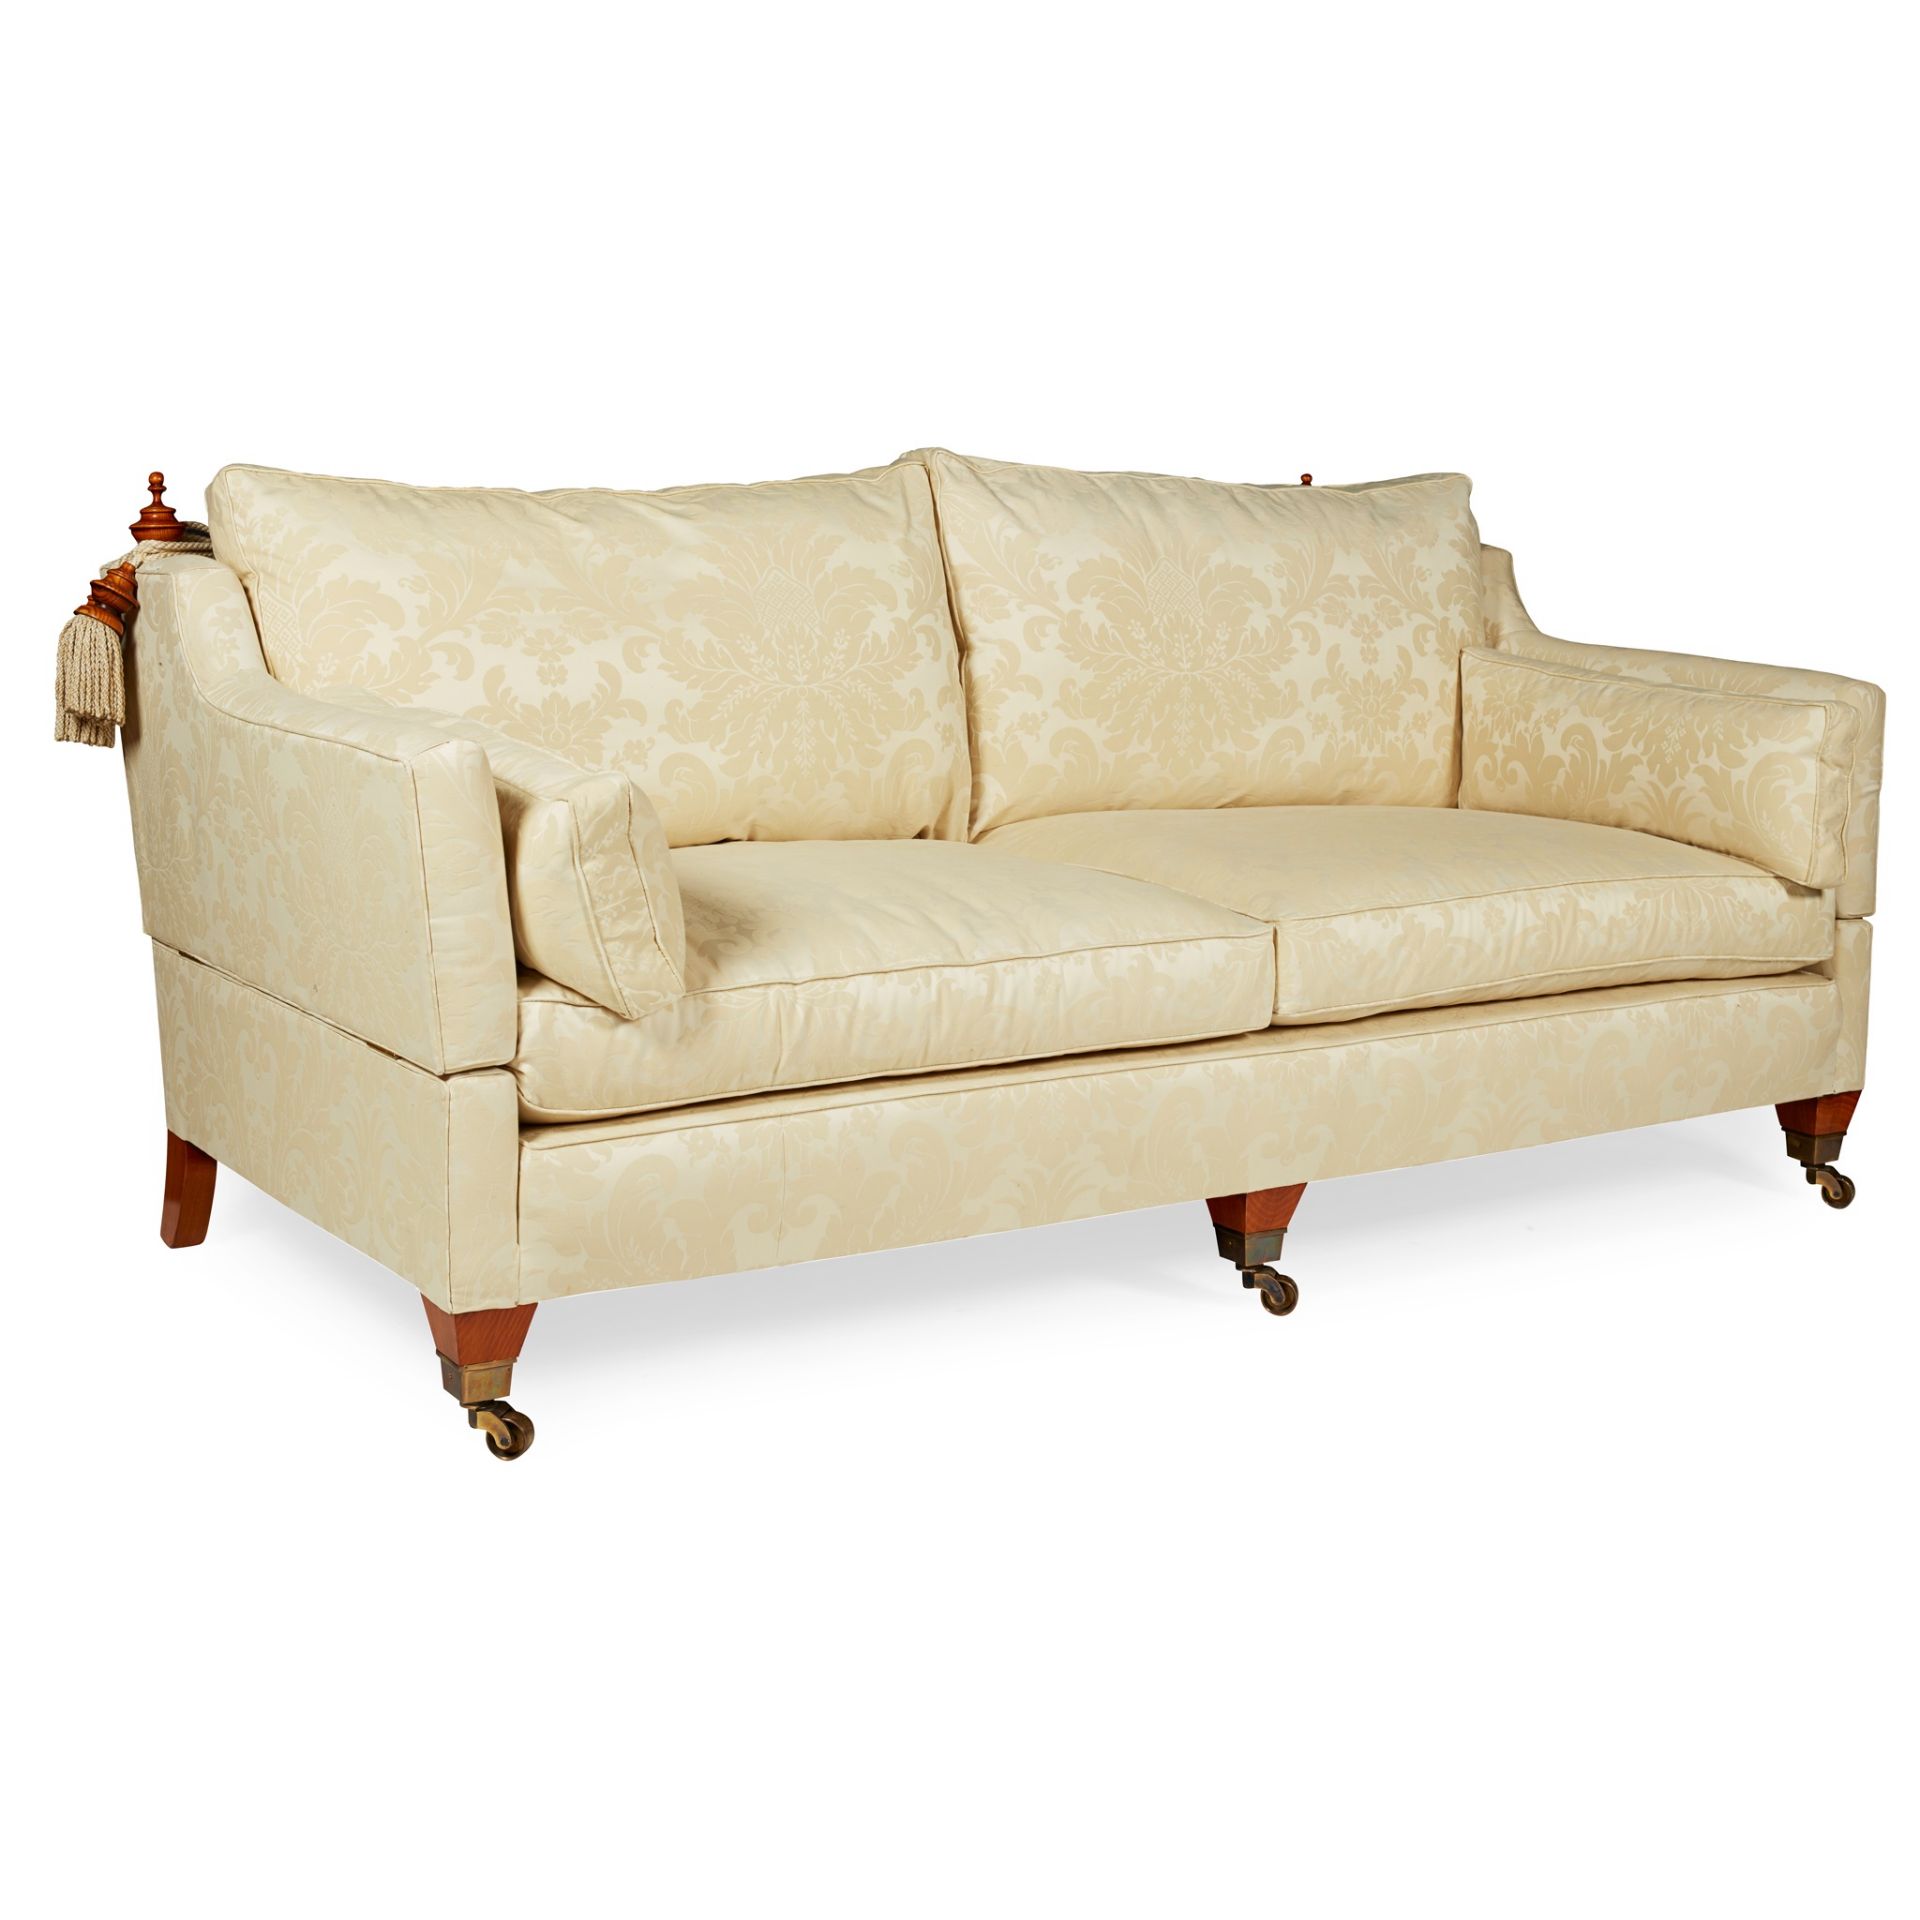 PAIR OF LARGE THREE SEATER KNOLE SOFAS MODERN